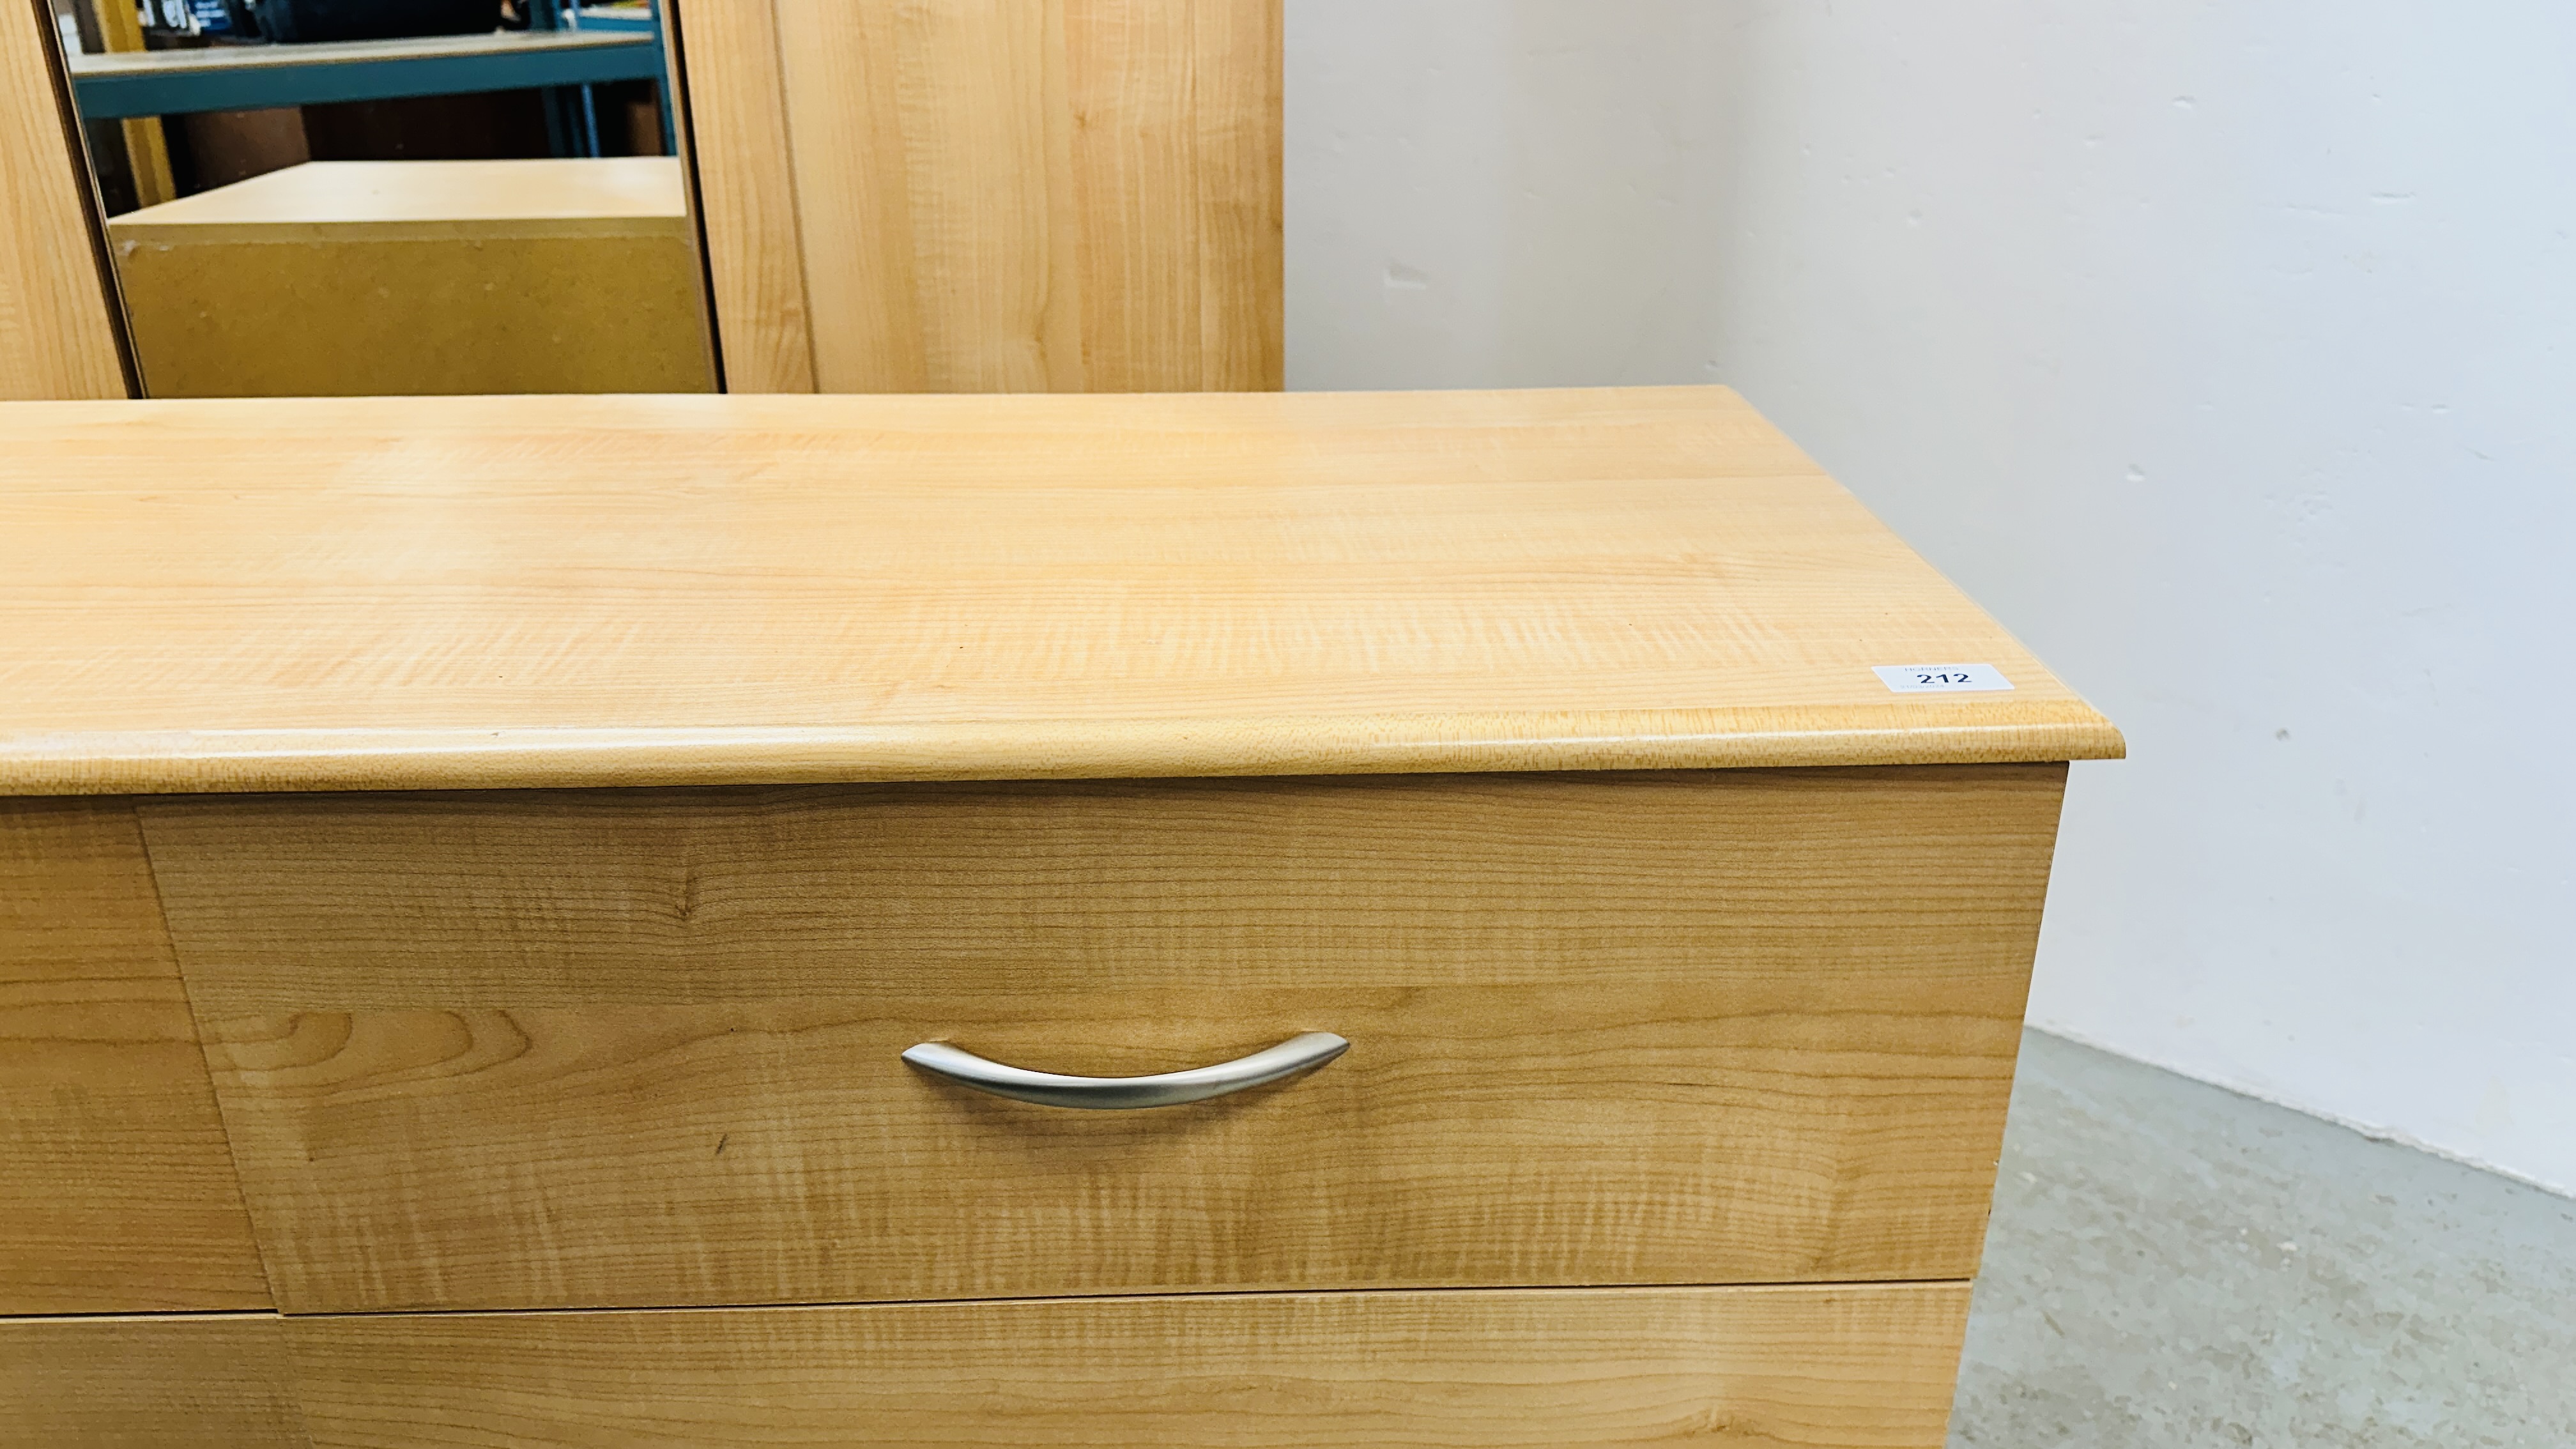 A MODERN 6 DRAWER BEECH FINISH CHEST W 122 X D 45 X H 74CM. - Image 4 of 13